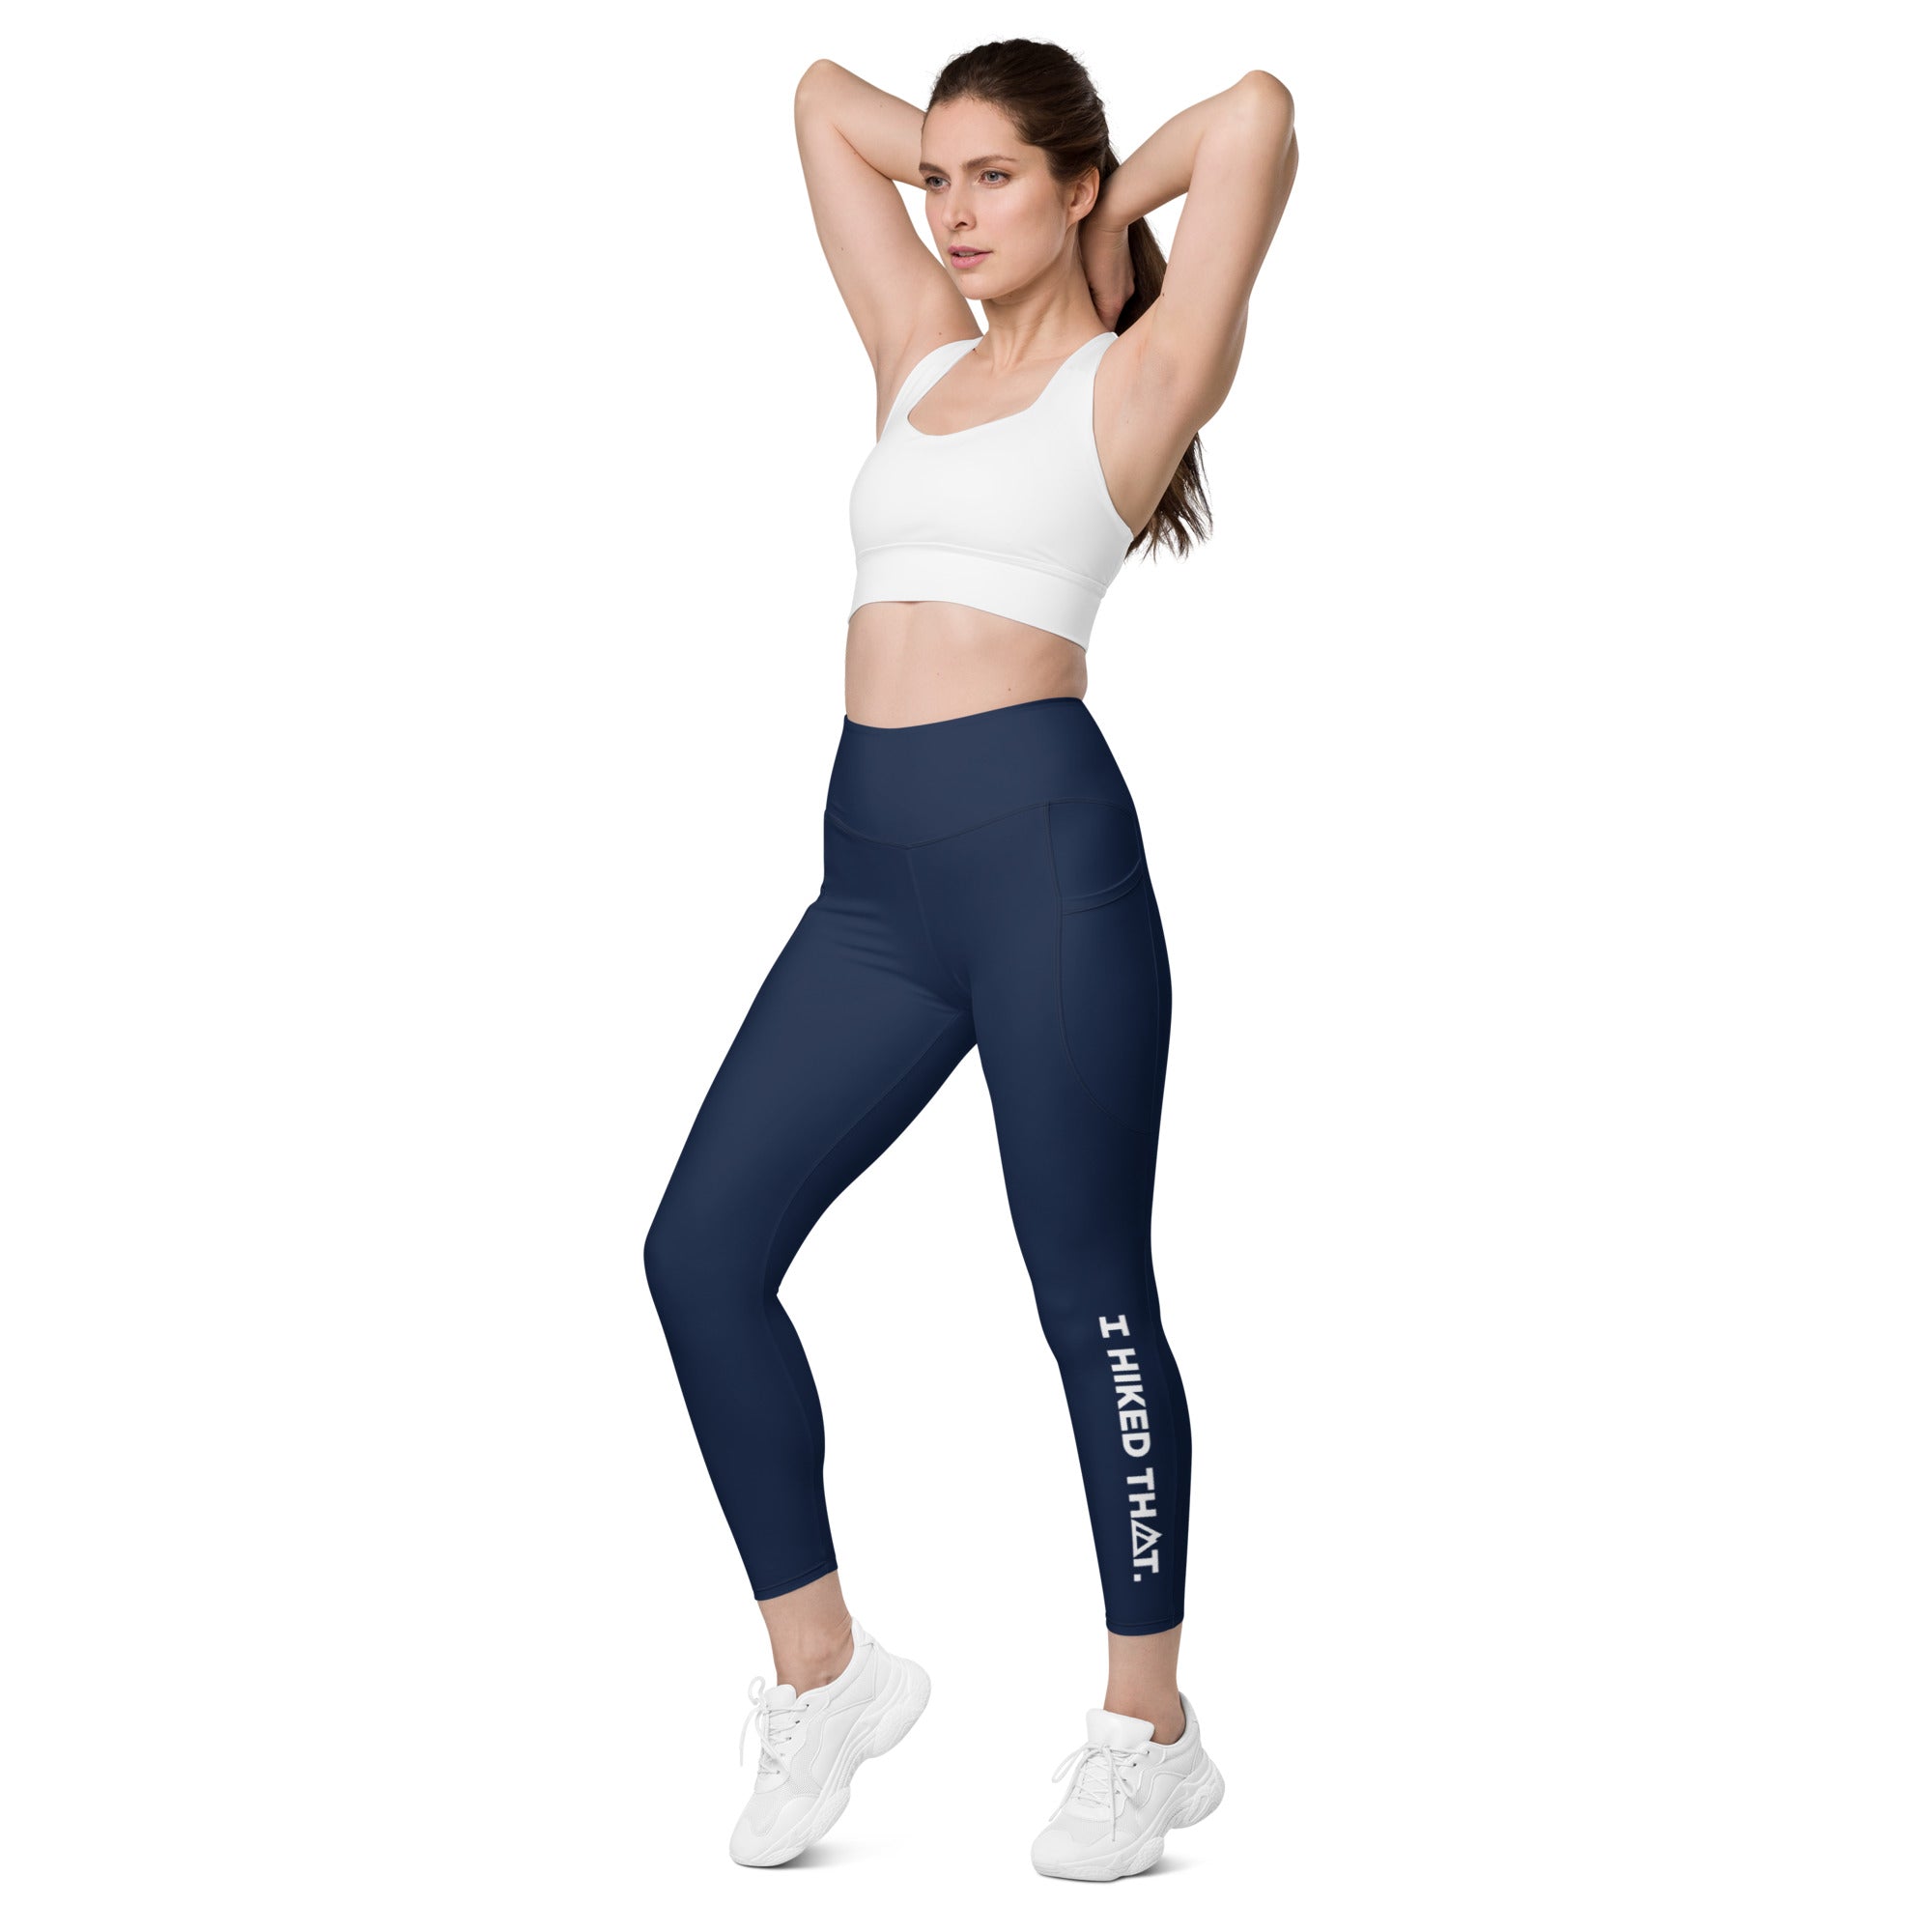 Leggings with pockets - Navy Blue - I HIKED THAT